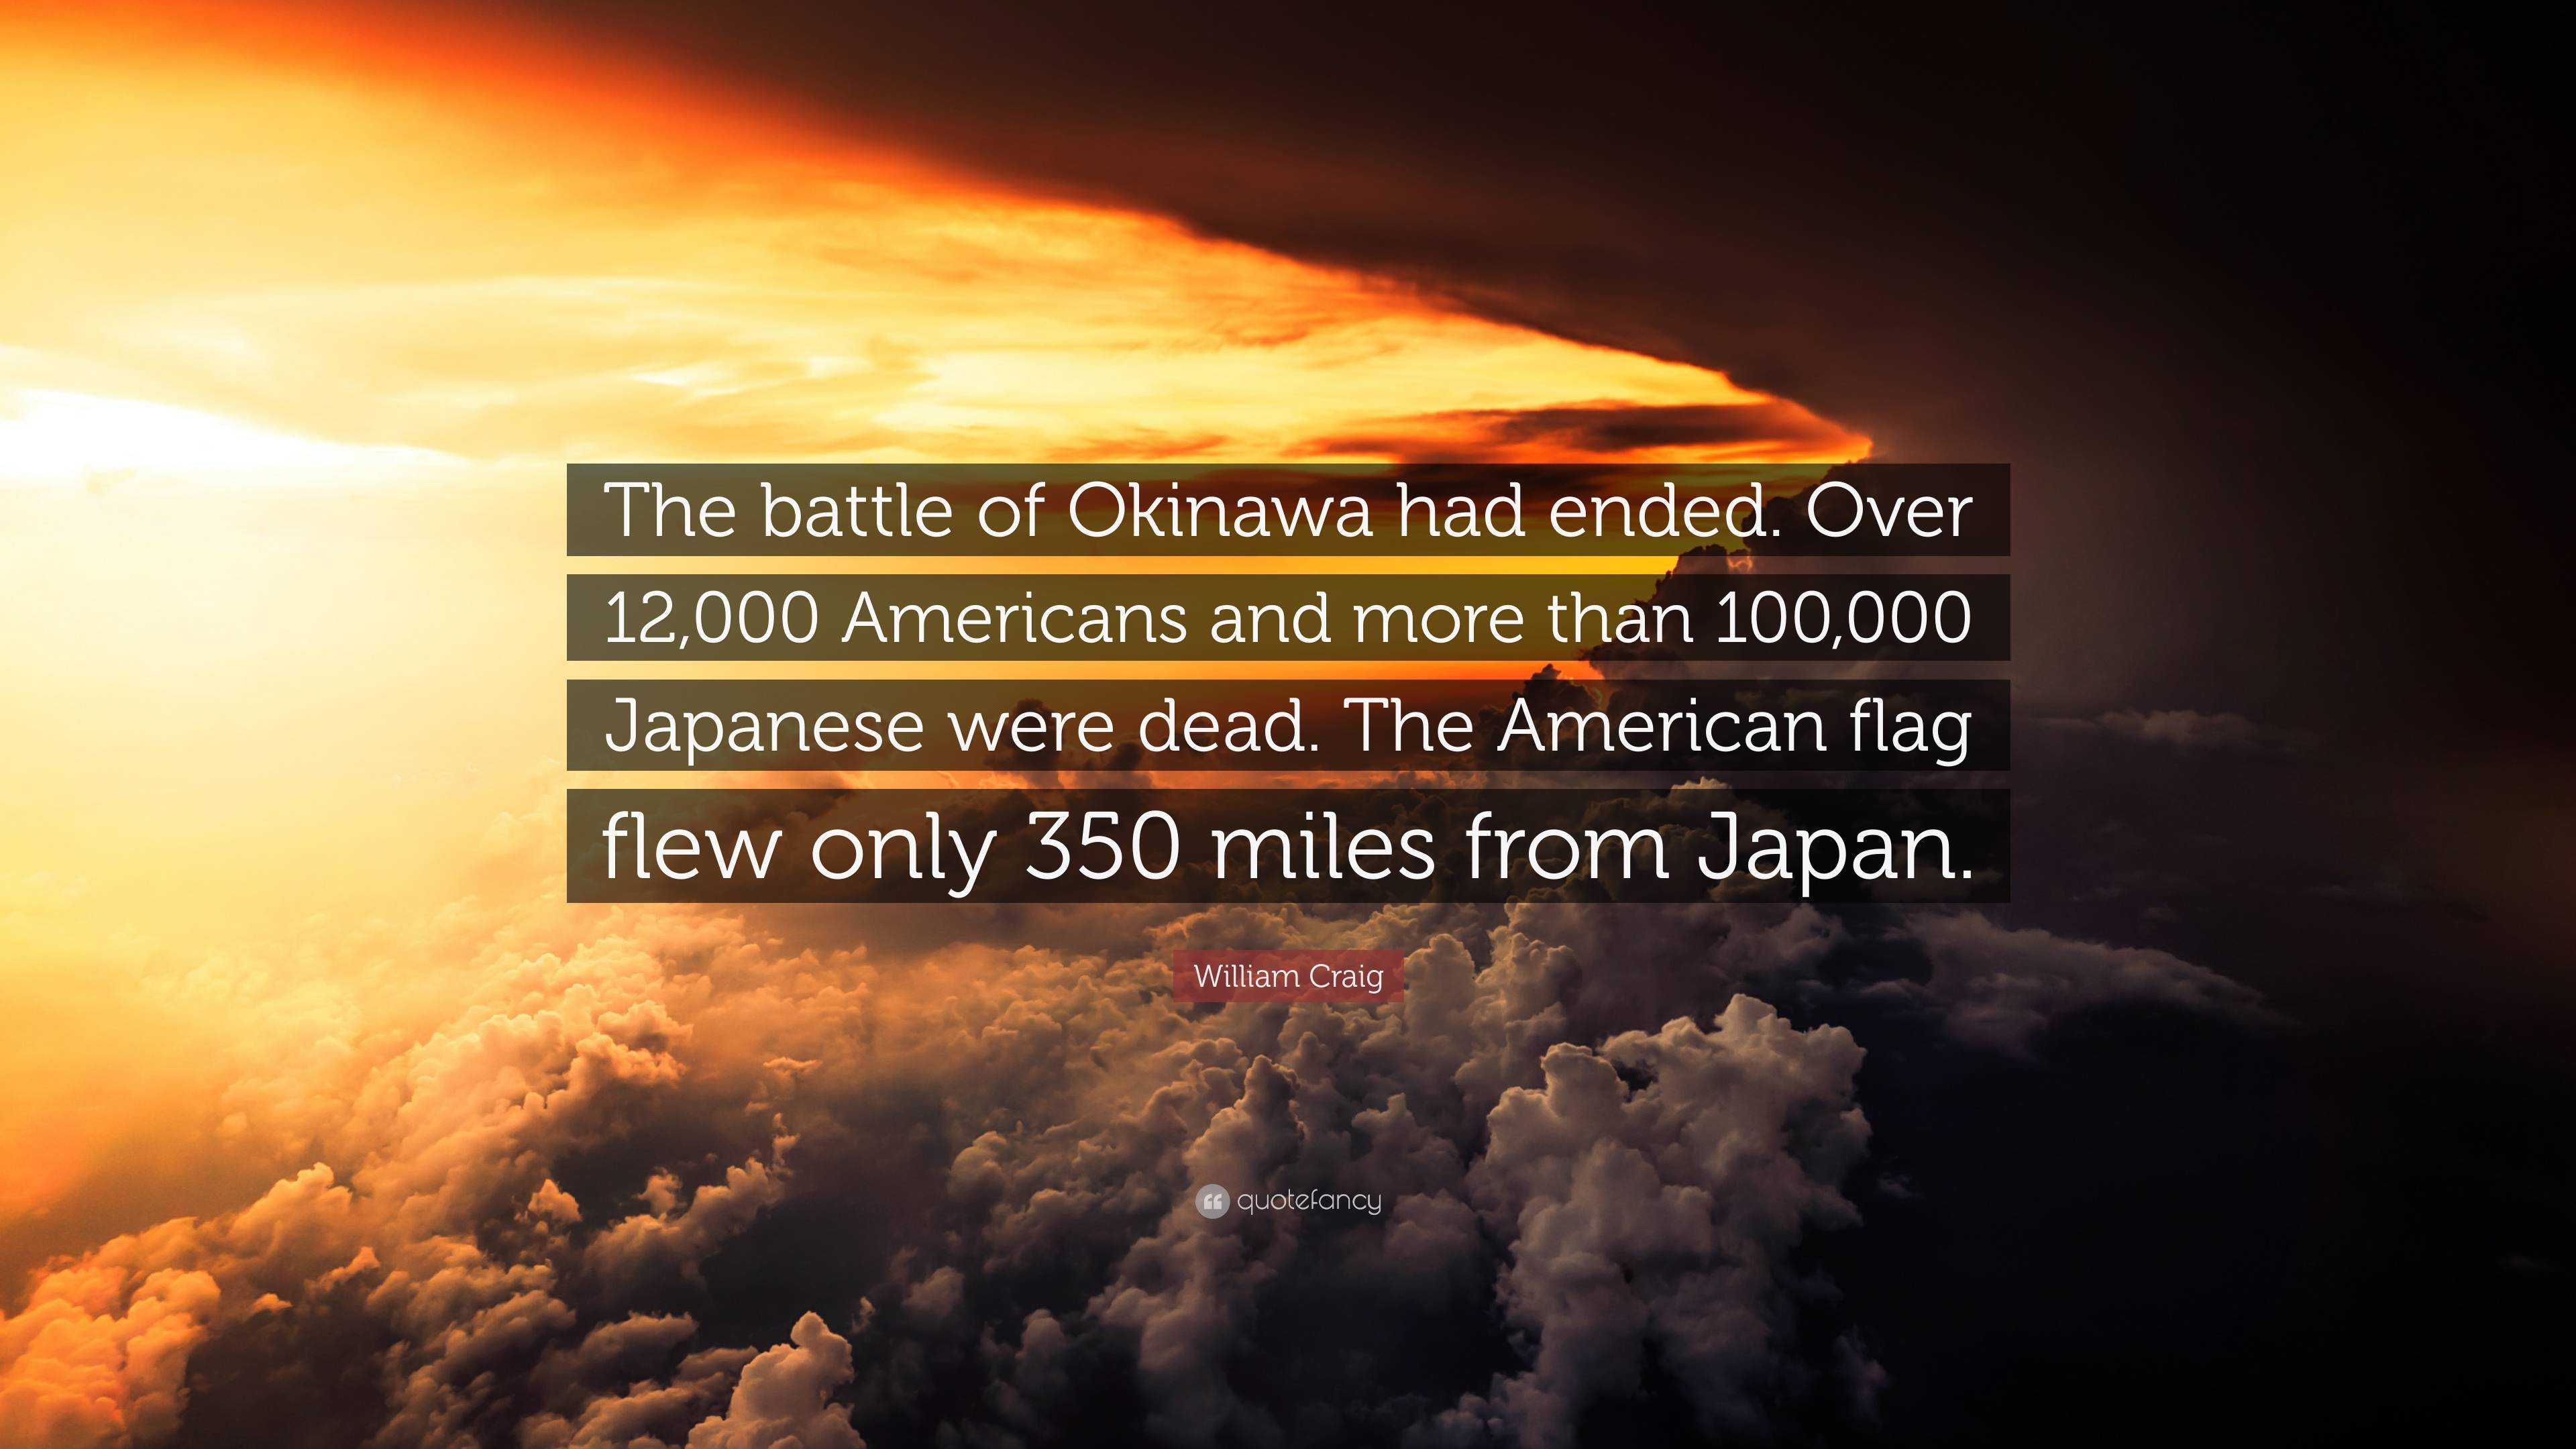 William Craig Quote The Battle Of Okinawa Had Ended Over 12 000 Americans And More Than 100 000 Japanese Were Dead The American Flag Flew